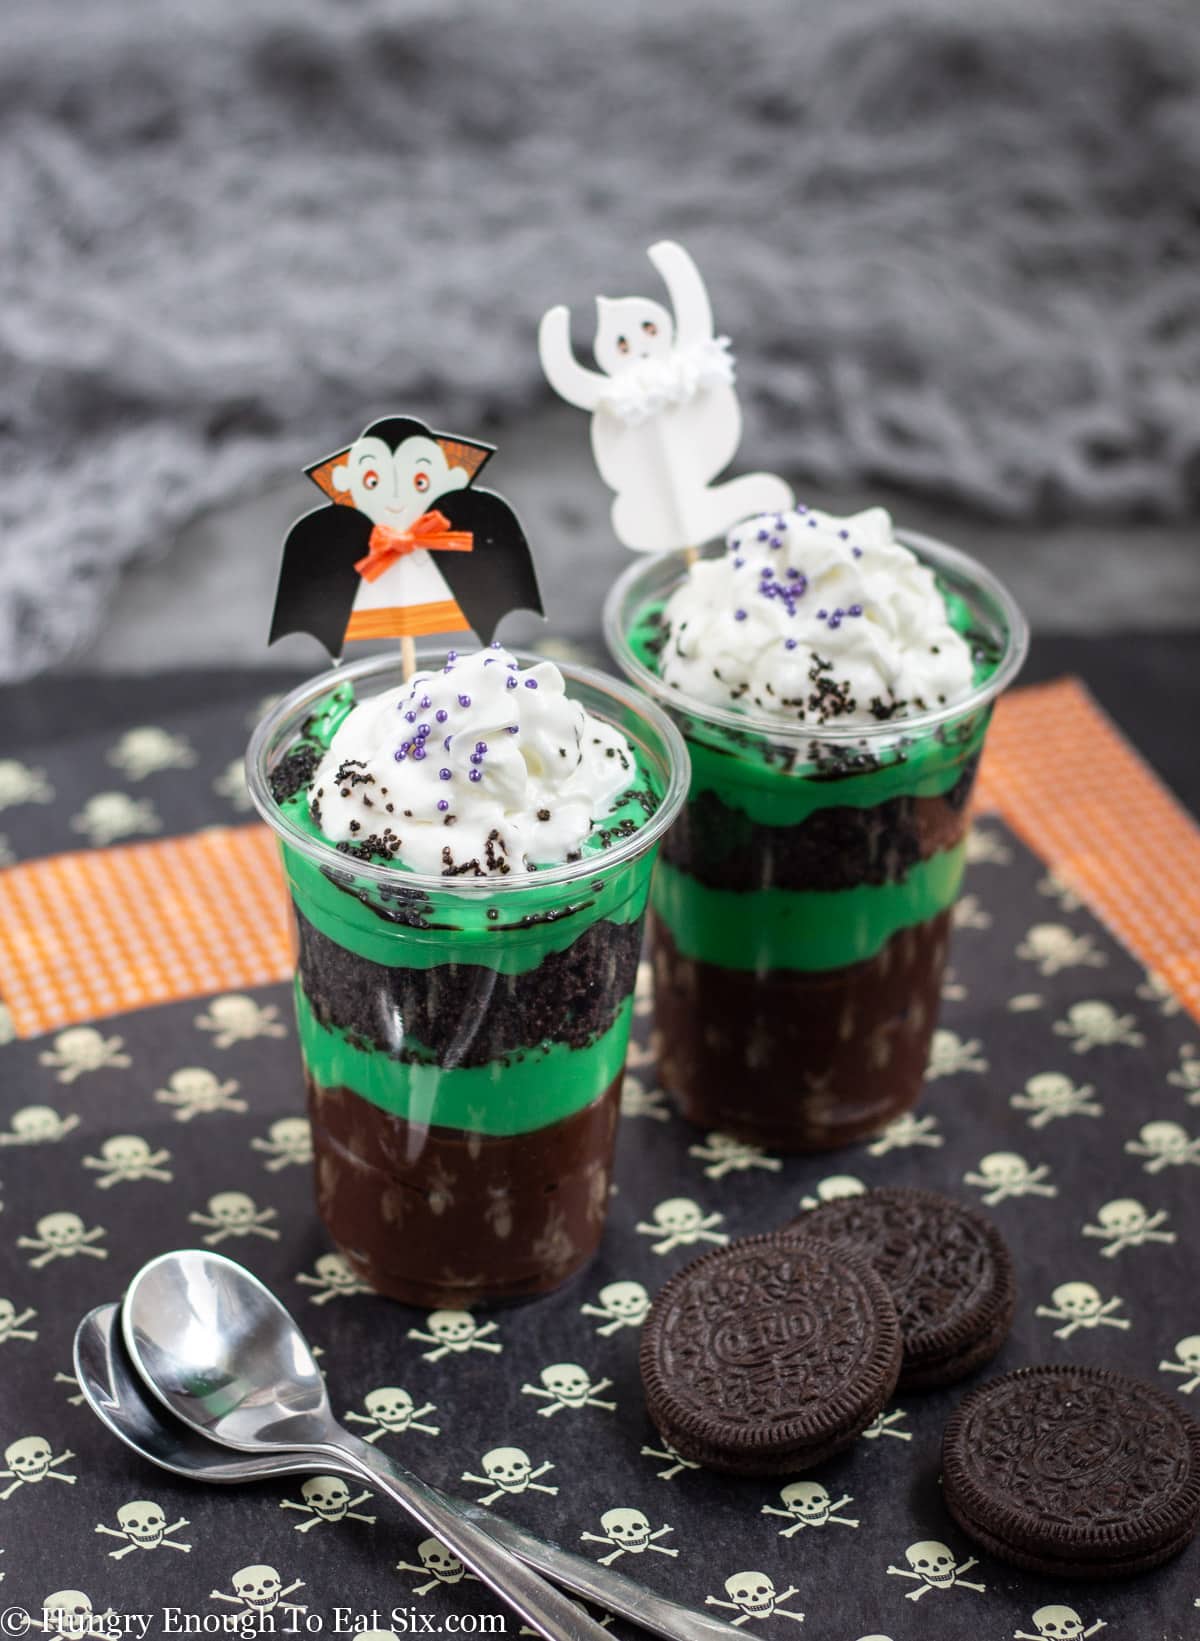 Two tall plastic cups with layered green and brown puddings and halloween decor.